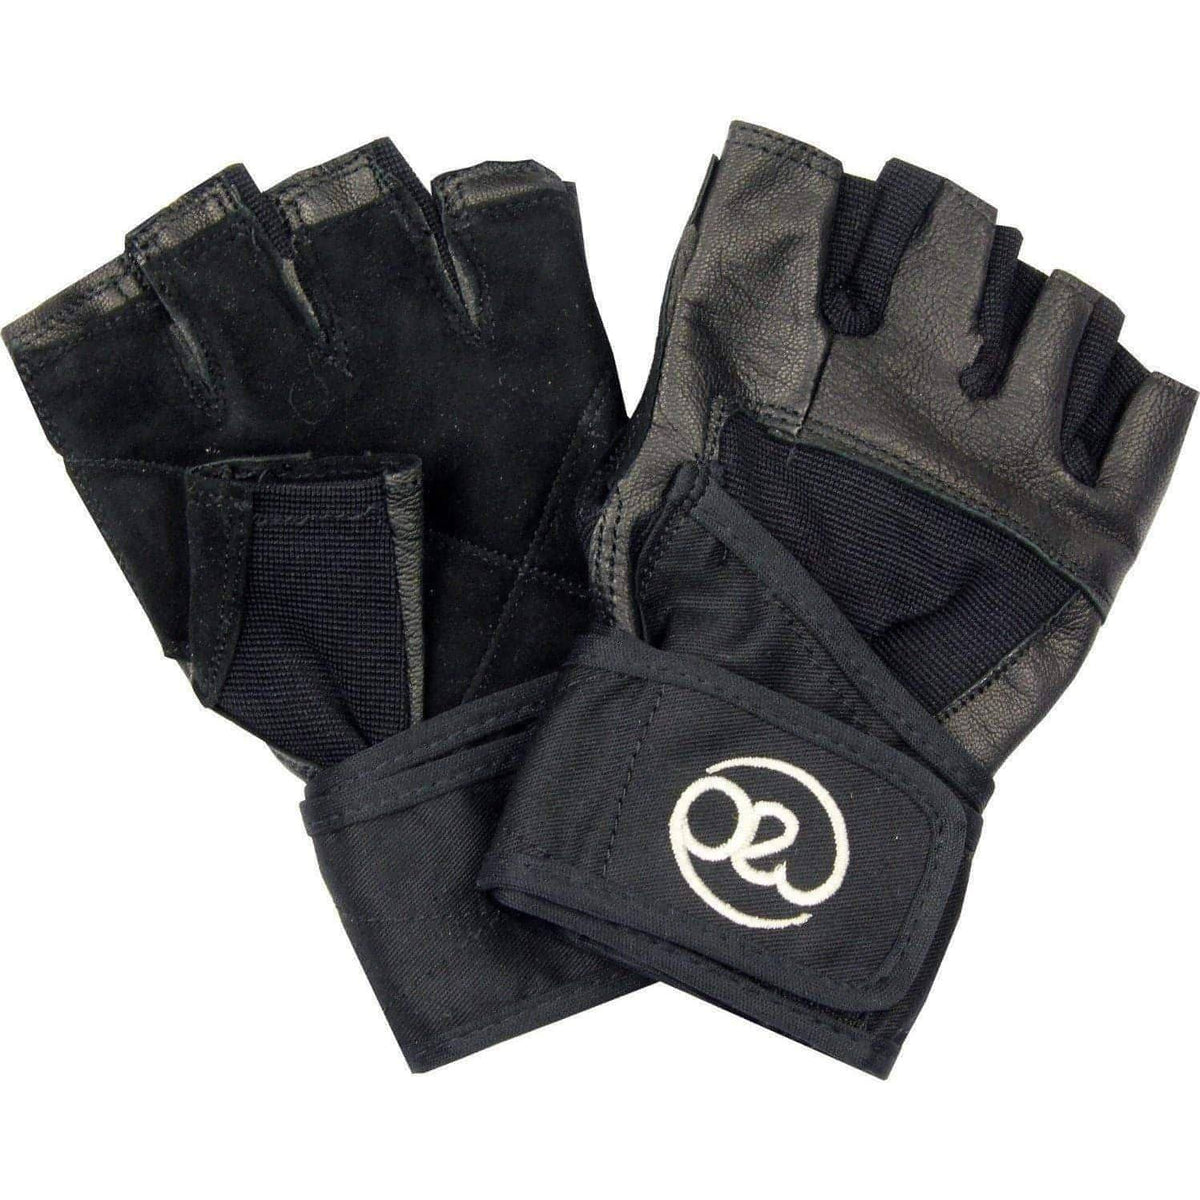 FM Weight Lifting Glove with Wrist Wrap